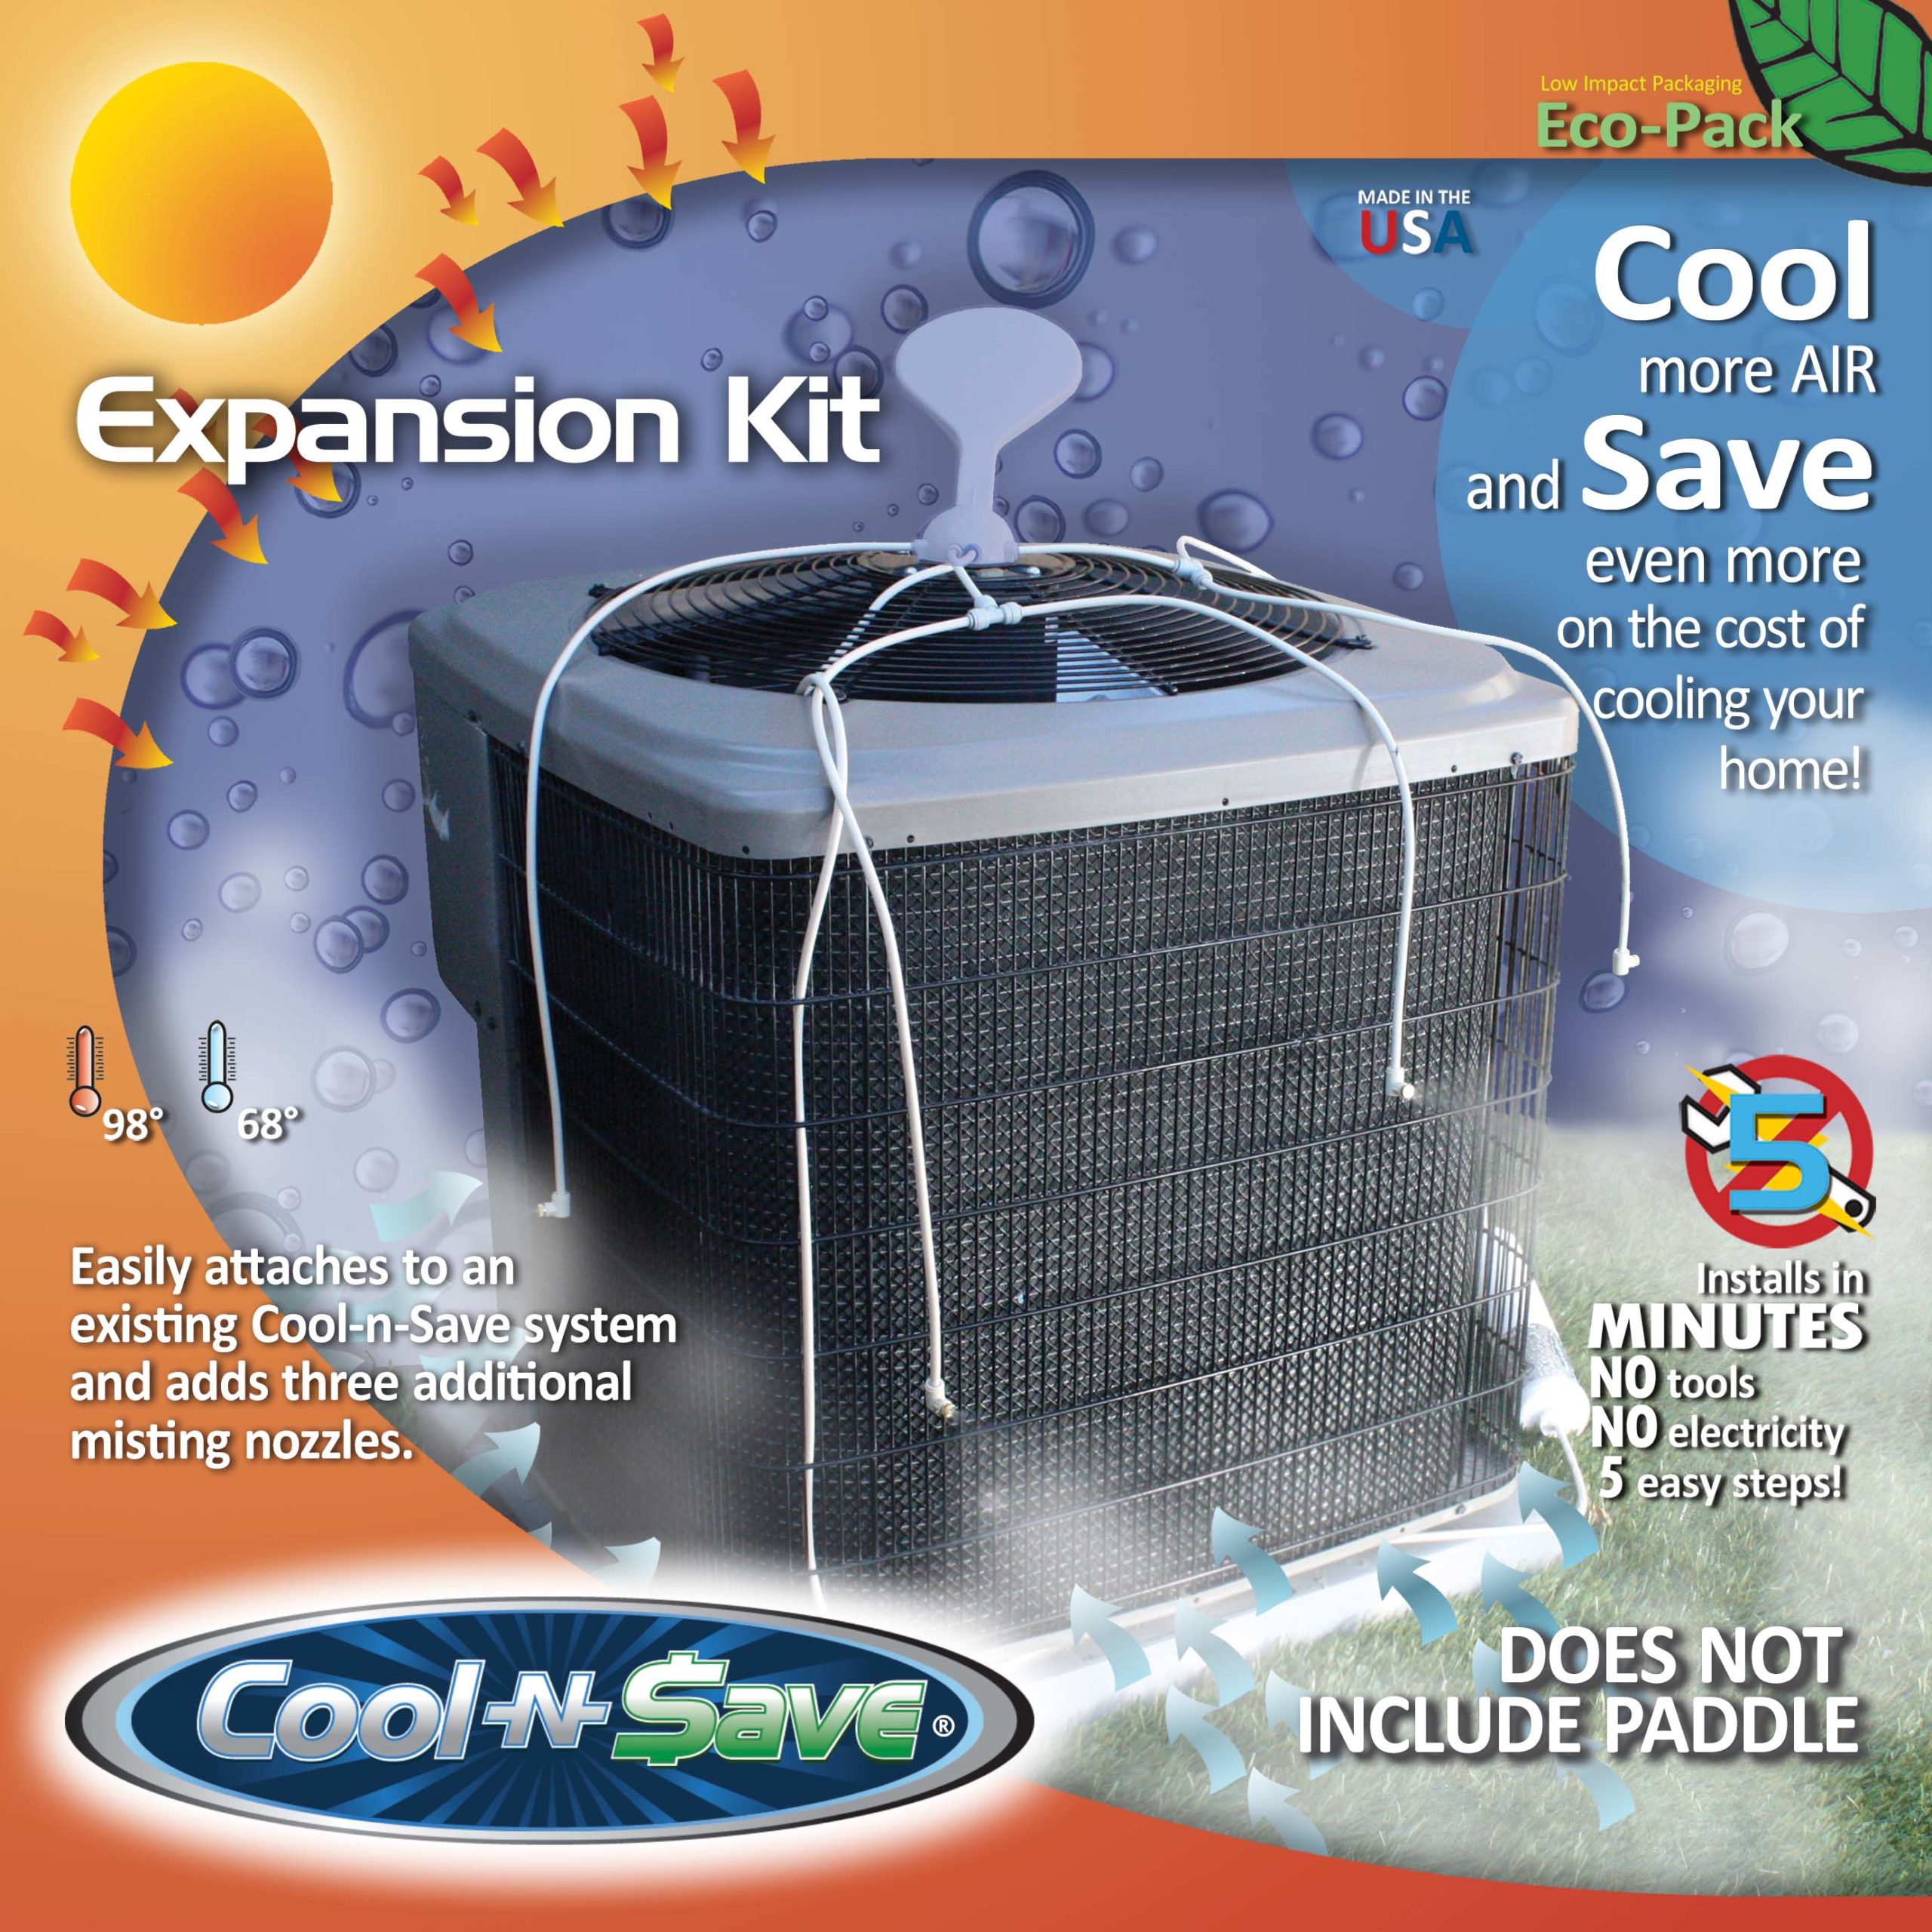 Expansion kit extends the Cool-n-Save system, but does not included the paddle.